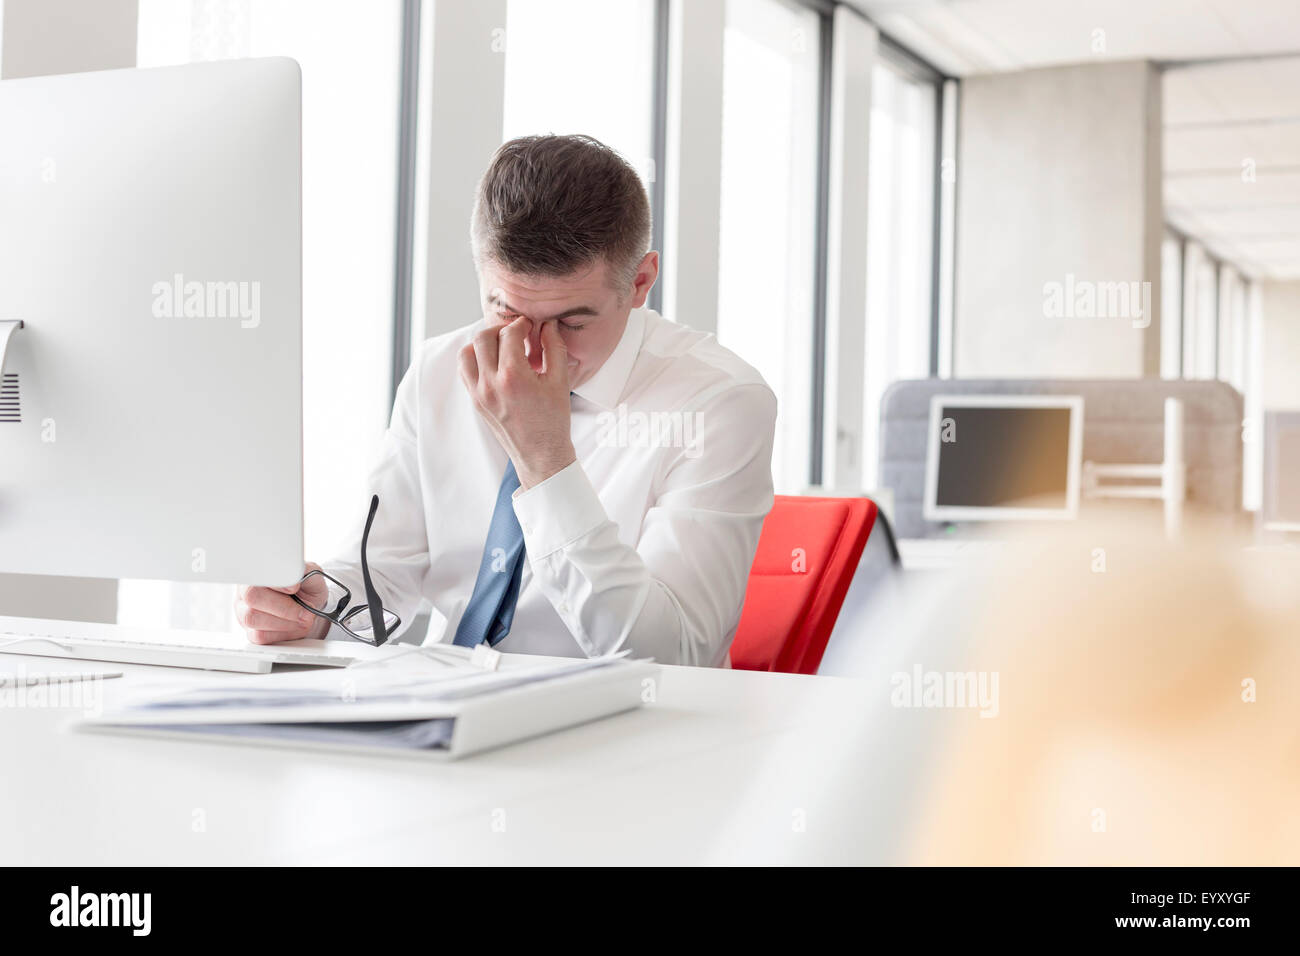 Tired businessman rubbing eyes at computer in office Stock Photo